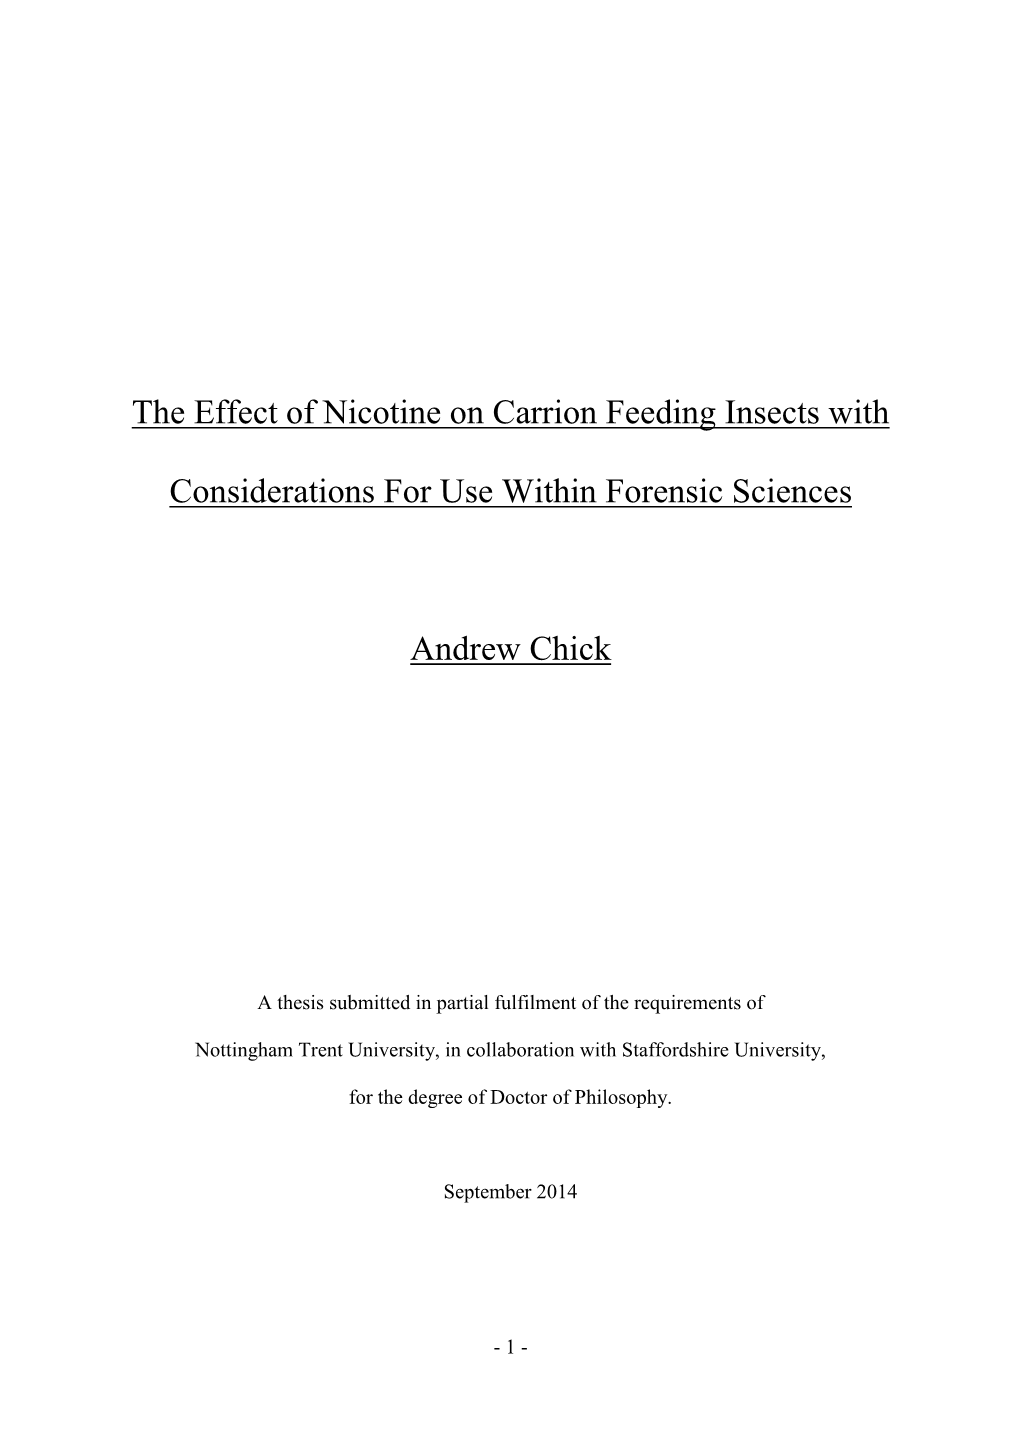 The Effect of Nicotine on Carrion Feeding Insects With